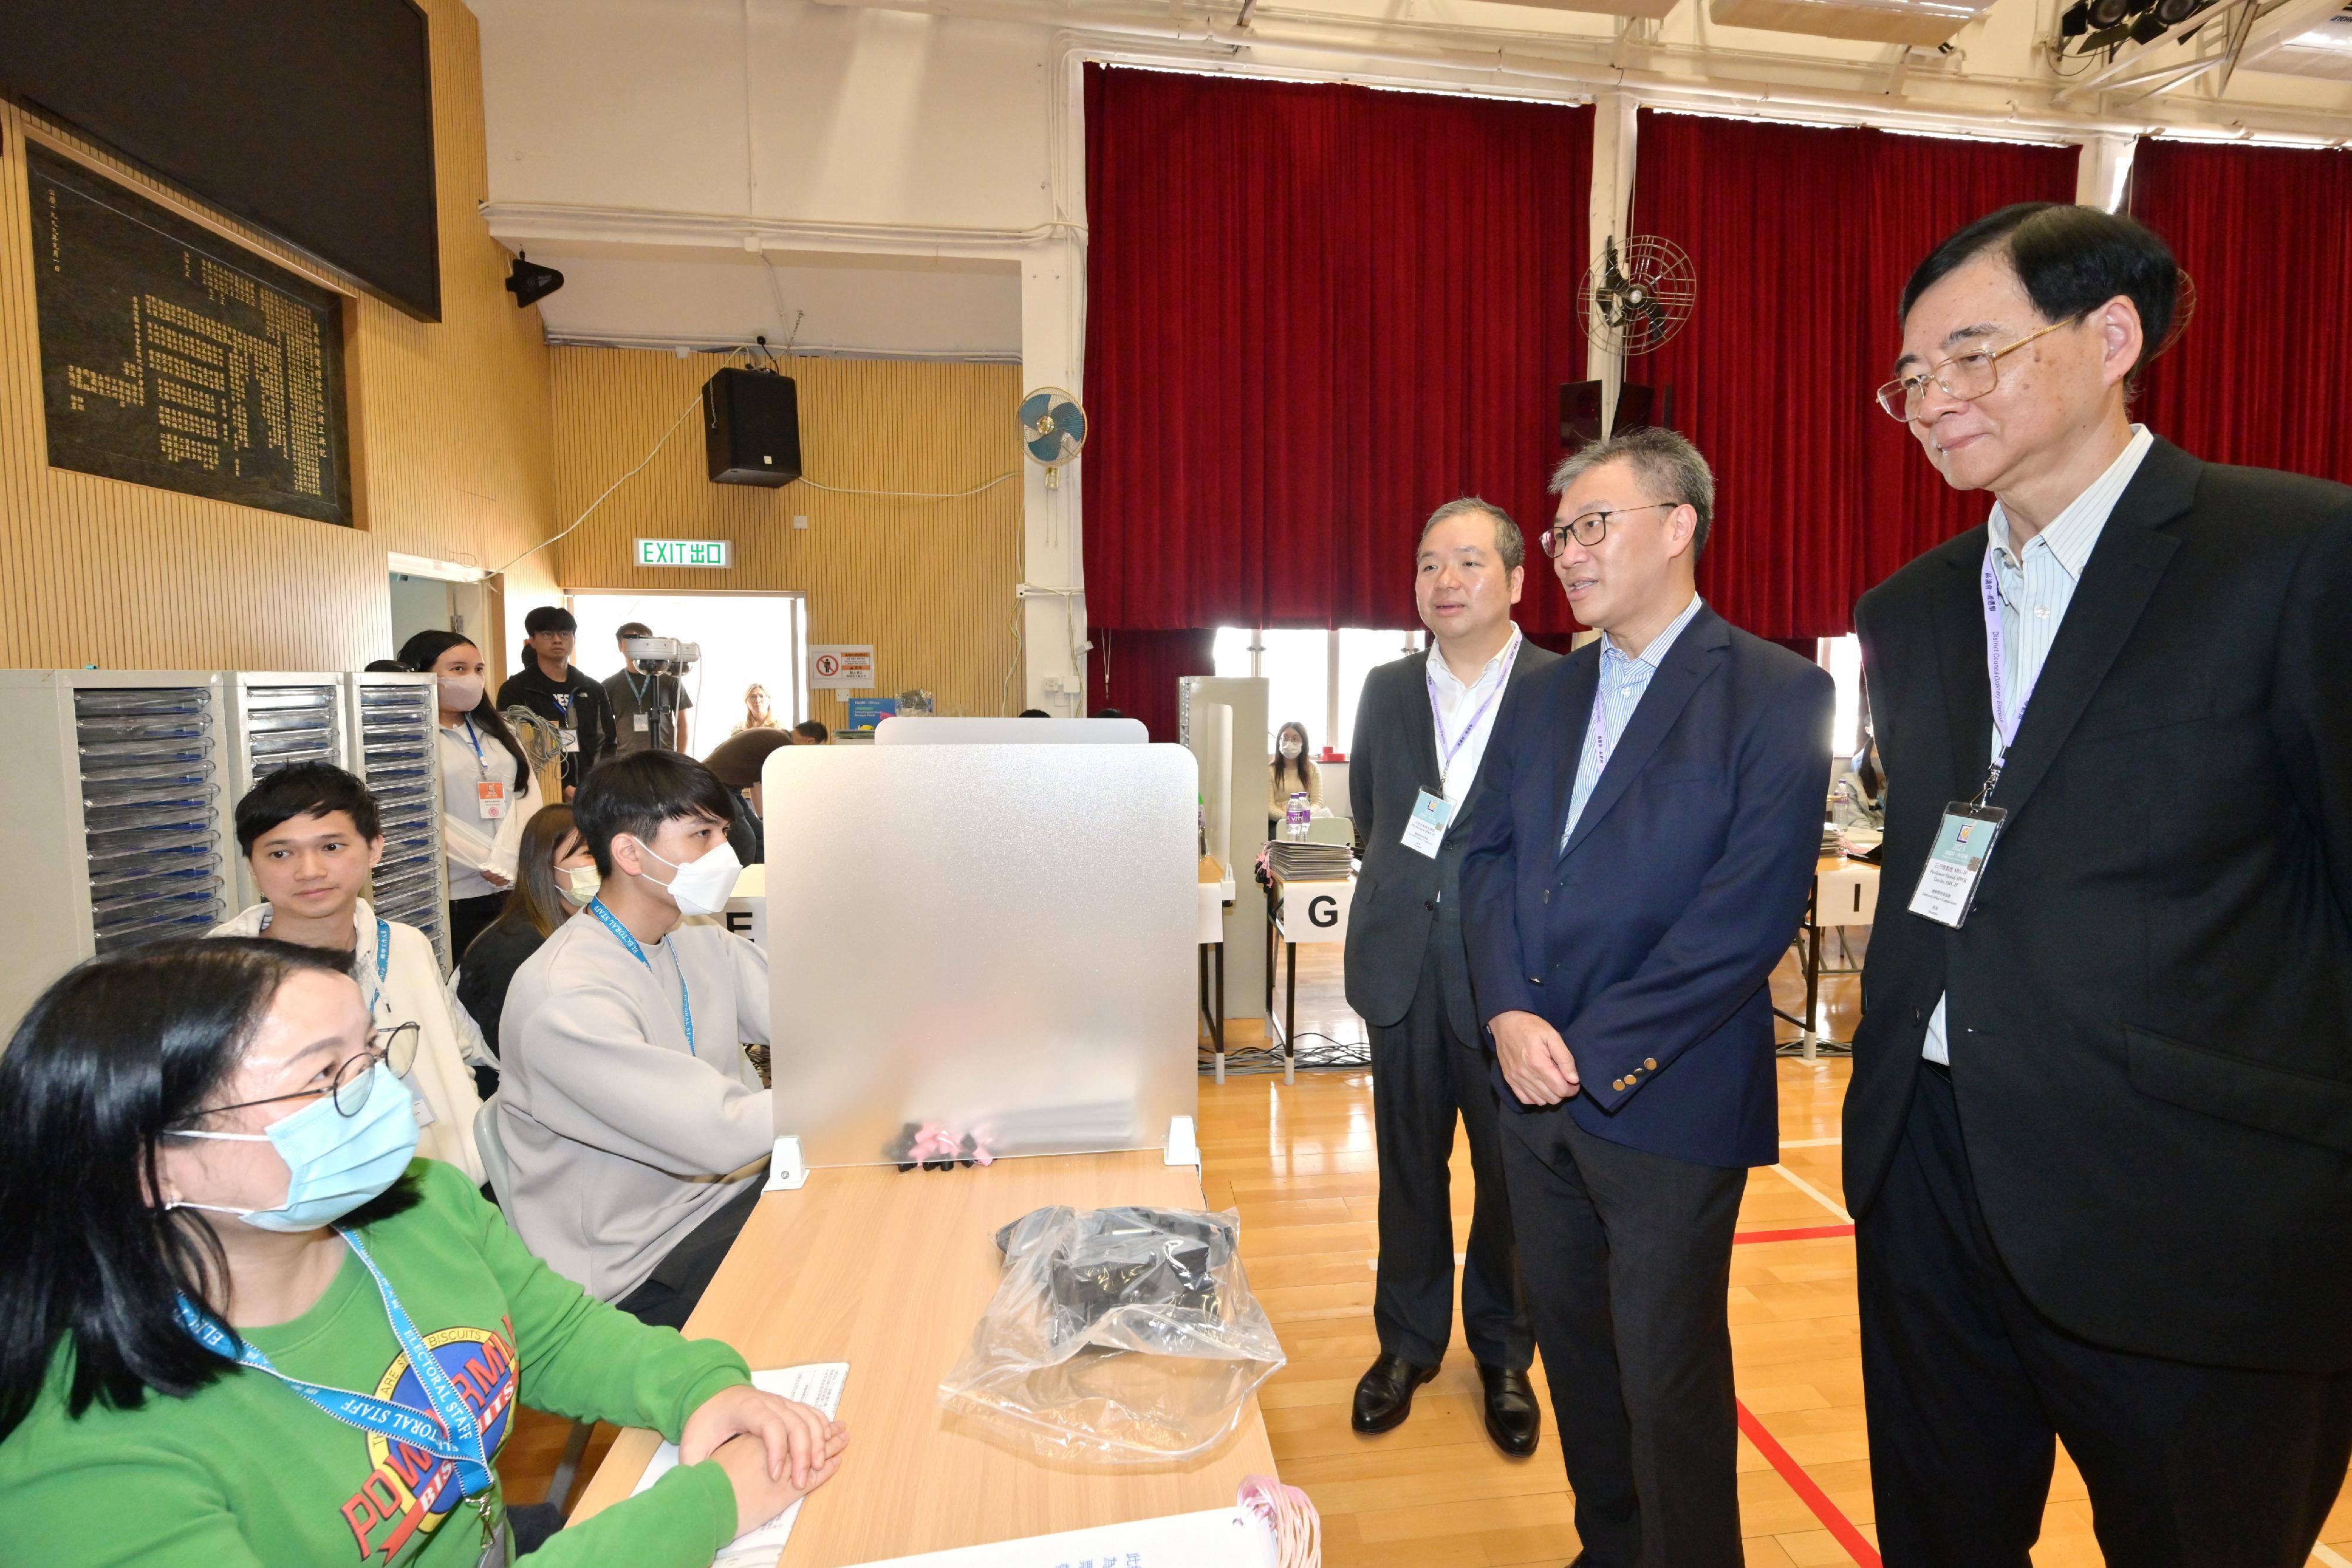 The Chairman of the Electoral Affairs Commission (EAC), Mr Justice David Lok (second right); the EAC members Professor Daniel Shek (first right) and Mr Bernard Man, SC (third right), visit a near boundary polling station of the 2023 District Council Ordinary Election this afternoon (December 9) to inspect the preparatory work of the electoral staff.